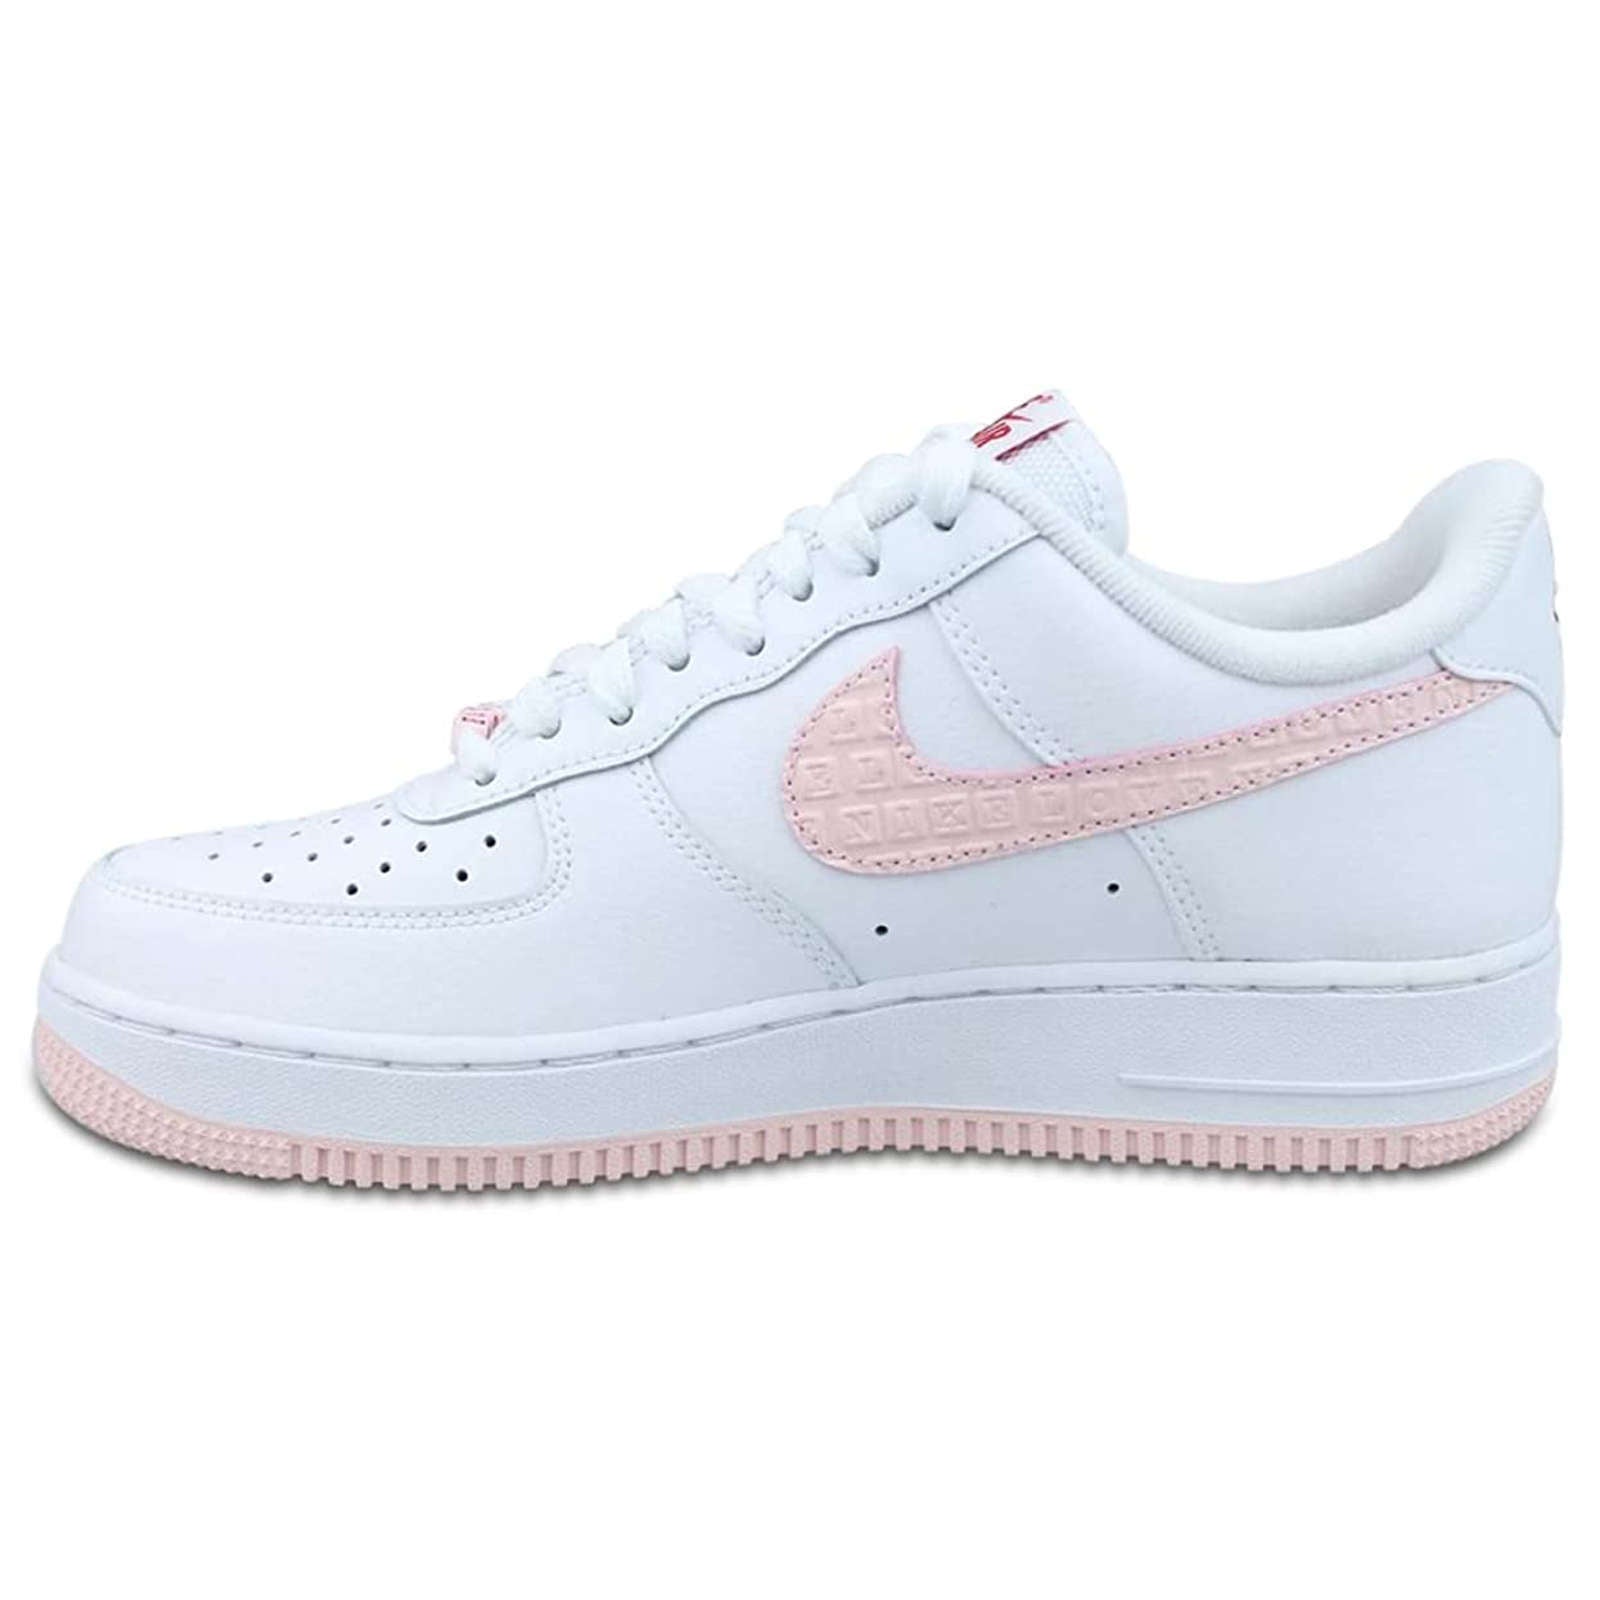 Nike Air Force 1 '07 VD Leather Women's Low-Top Trainers#color_white atmosphere